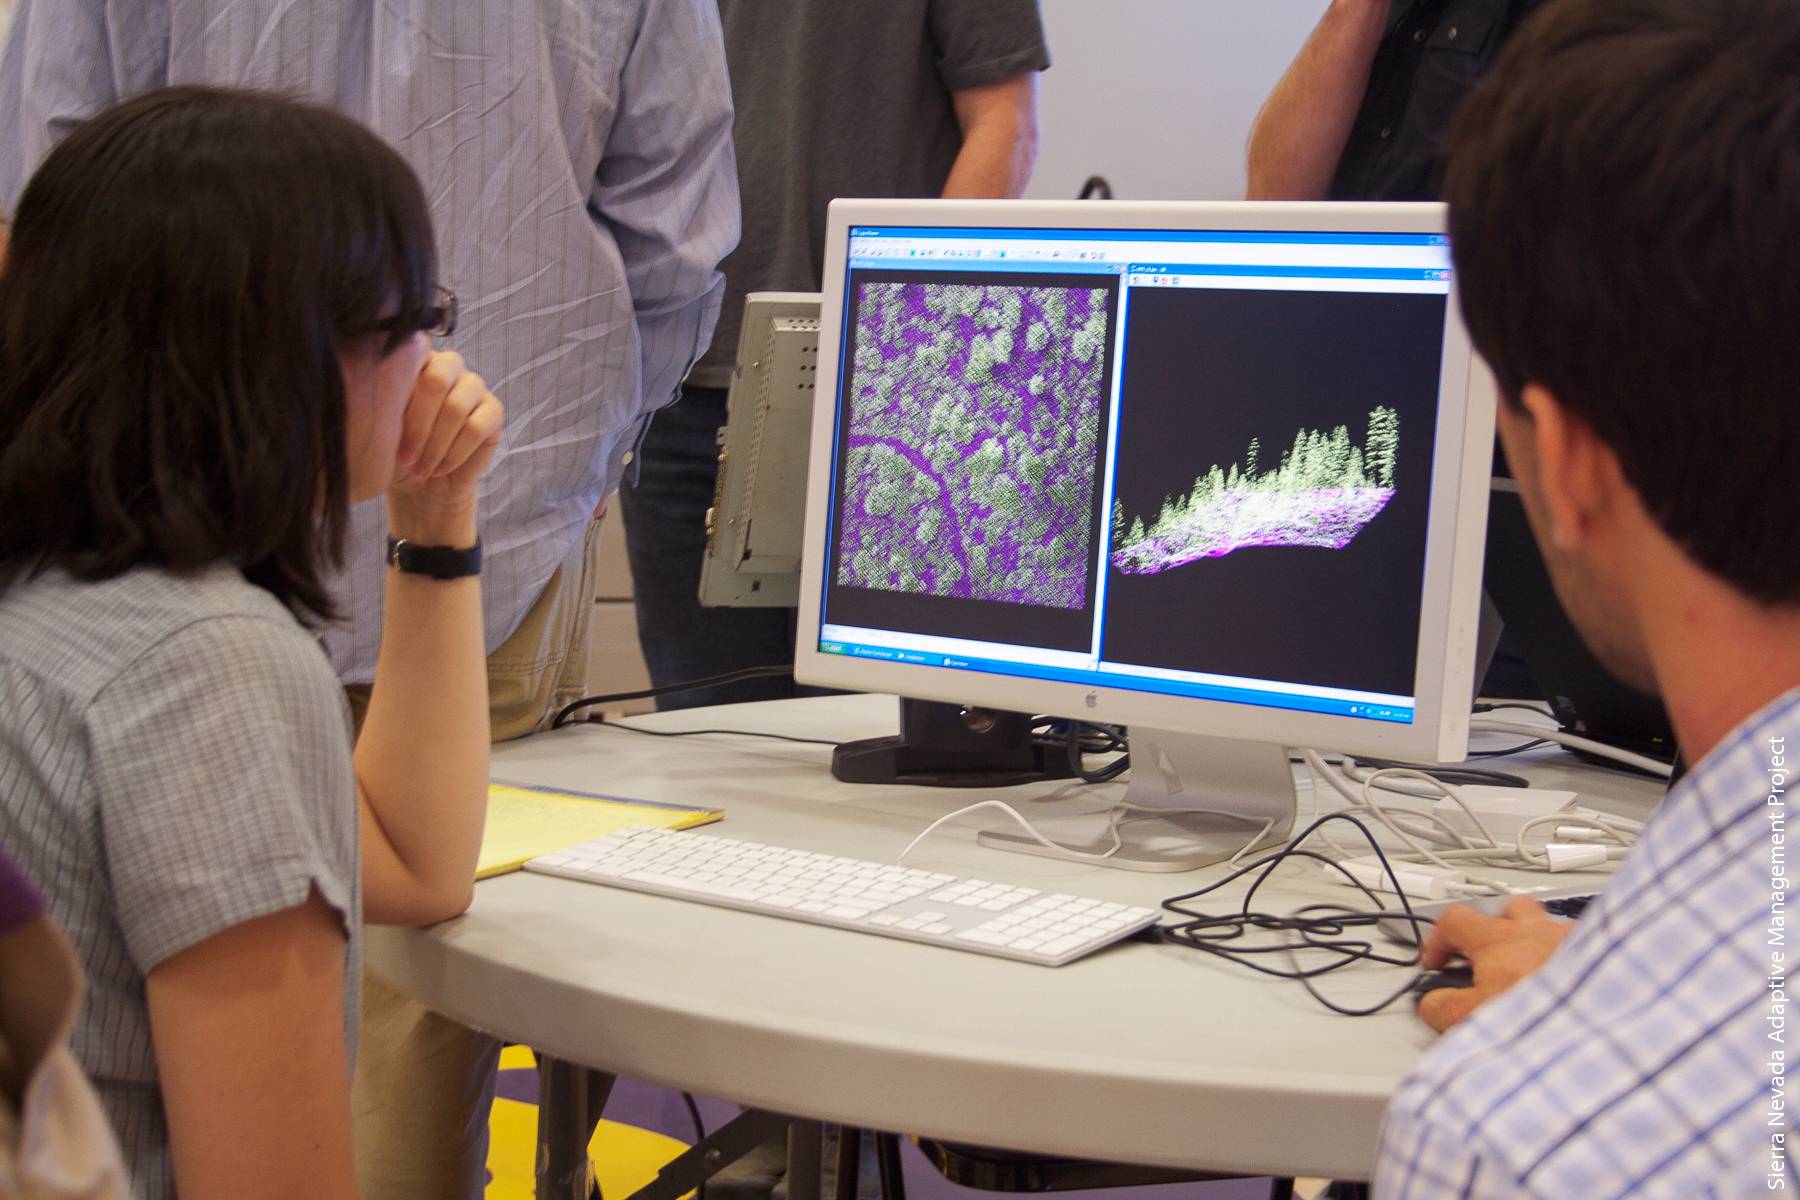 Public workshops showing Lidar mapping capabilities have engaged members of the public, resource managers and staff from resource agencies. The adoption of Lidar in forest management is likely as the costs of the technology continue to drop.